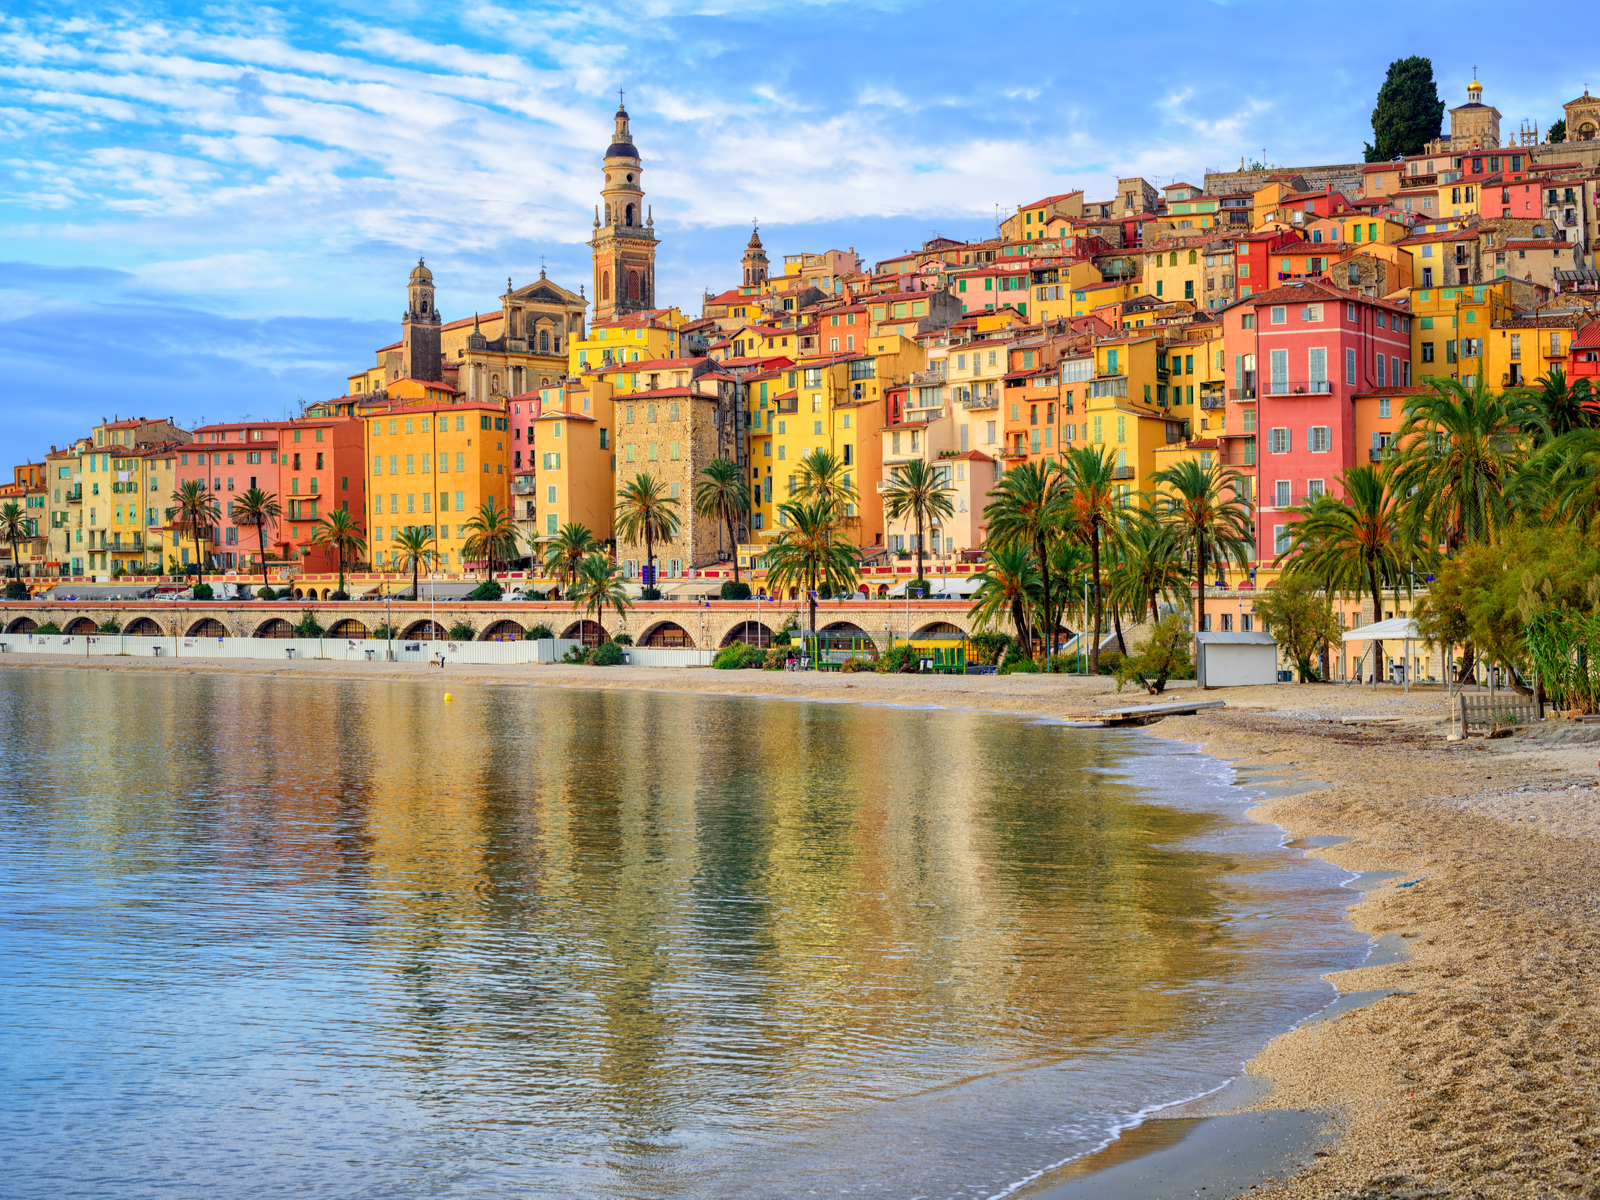 Sandy beach pictured during the worst time to visit France in the old town of Menton